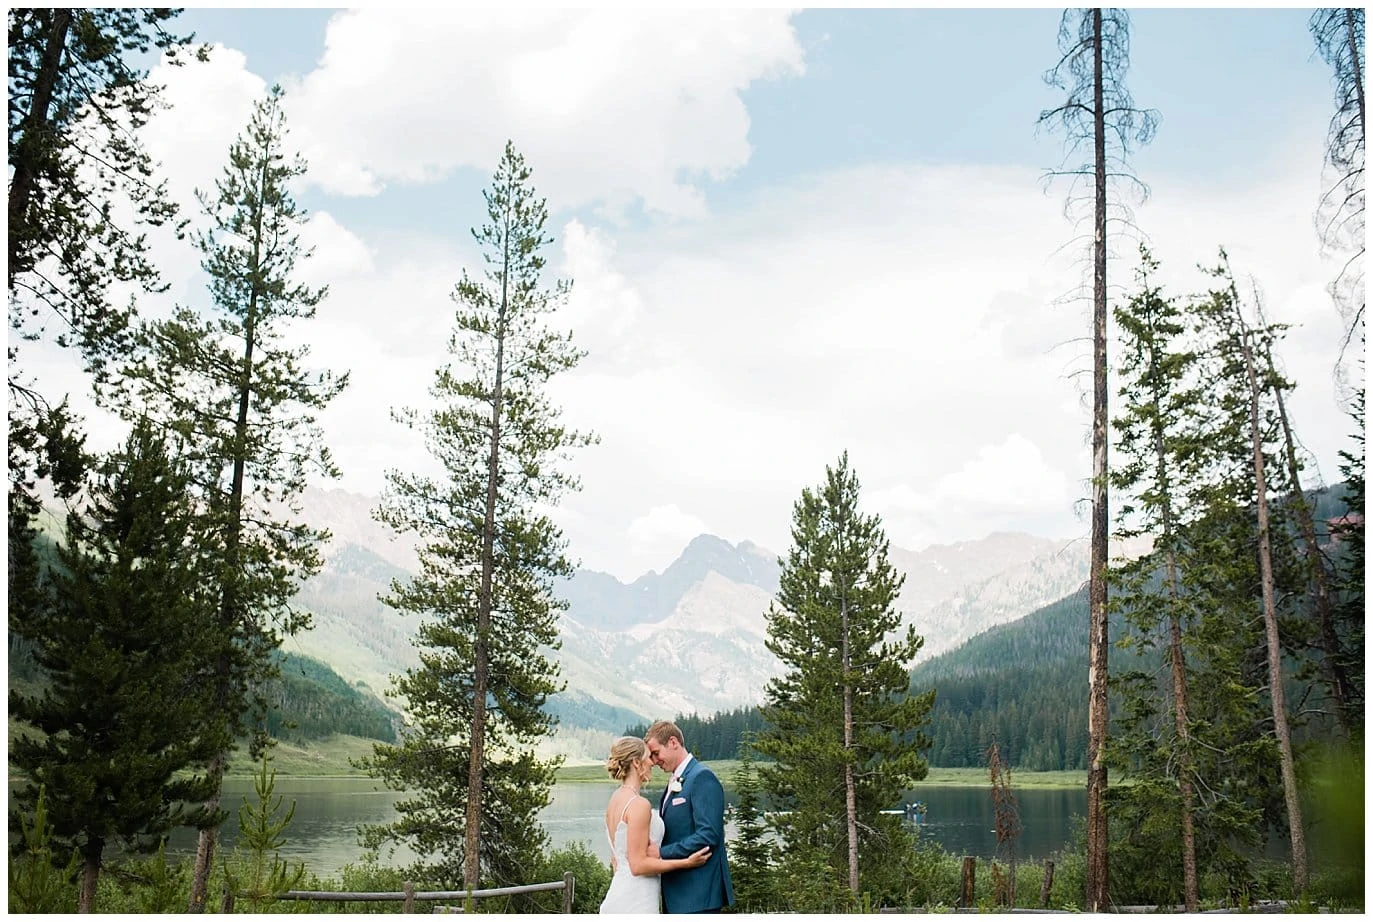 bride and groom cuddle in front of lake at Piney River Ranch Summer Wedding by Piney River Ranch wedding photographer Jennie Crate photographer